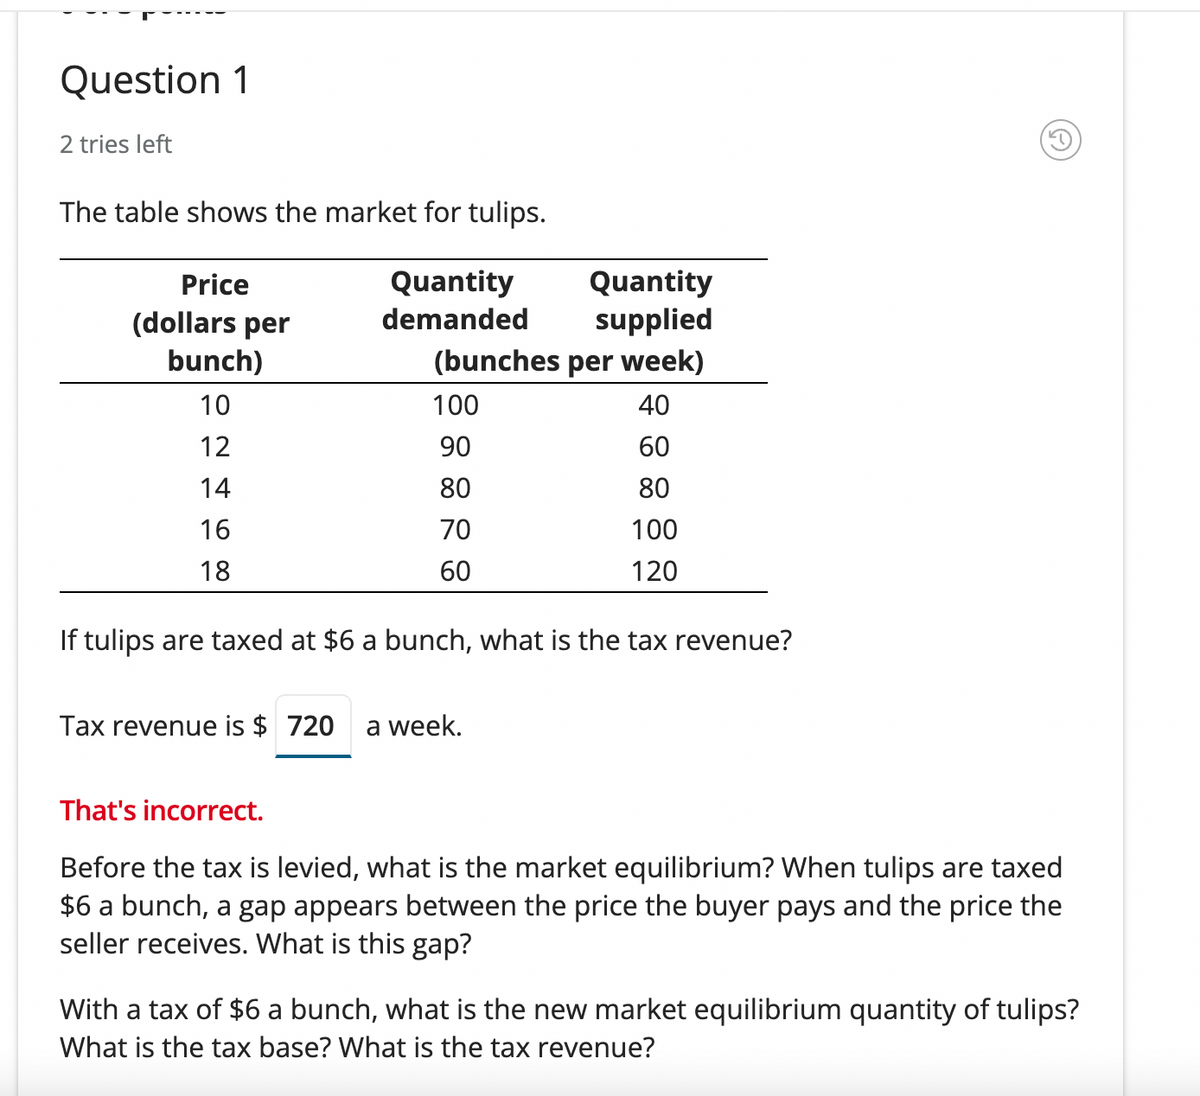 Question 1
2 tries left
The table shows the market for tulips.
Quantity
Quantity
supplied
(bunches per week)
Price
demanded
(dollars per
bunch)
10
100
40
12
90
60
14
80
80
16
70
100
18
60
120
If tulips are taxed at $6 a bunch, what is the tax revenue?
Tax revenue is $ 720
a week.
That's incorrect.
Before the tax is levied, what is the market equilibrium? When tulips are taxed
$6 a bunch, a gap appears between the price the buyer pays and the price the
seller receives. What is this gap?
With a tax of $6 a bunch, what is the new market equilibrium quantity of tulips?
What is the tax base? What is the tax revenue?
